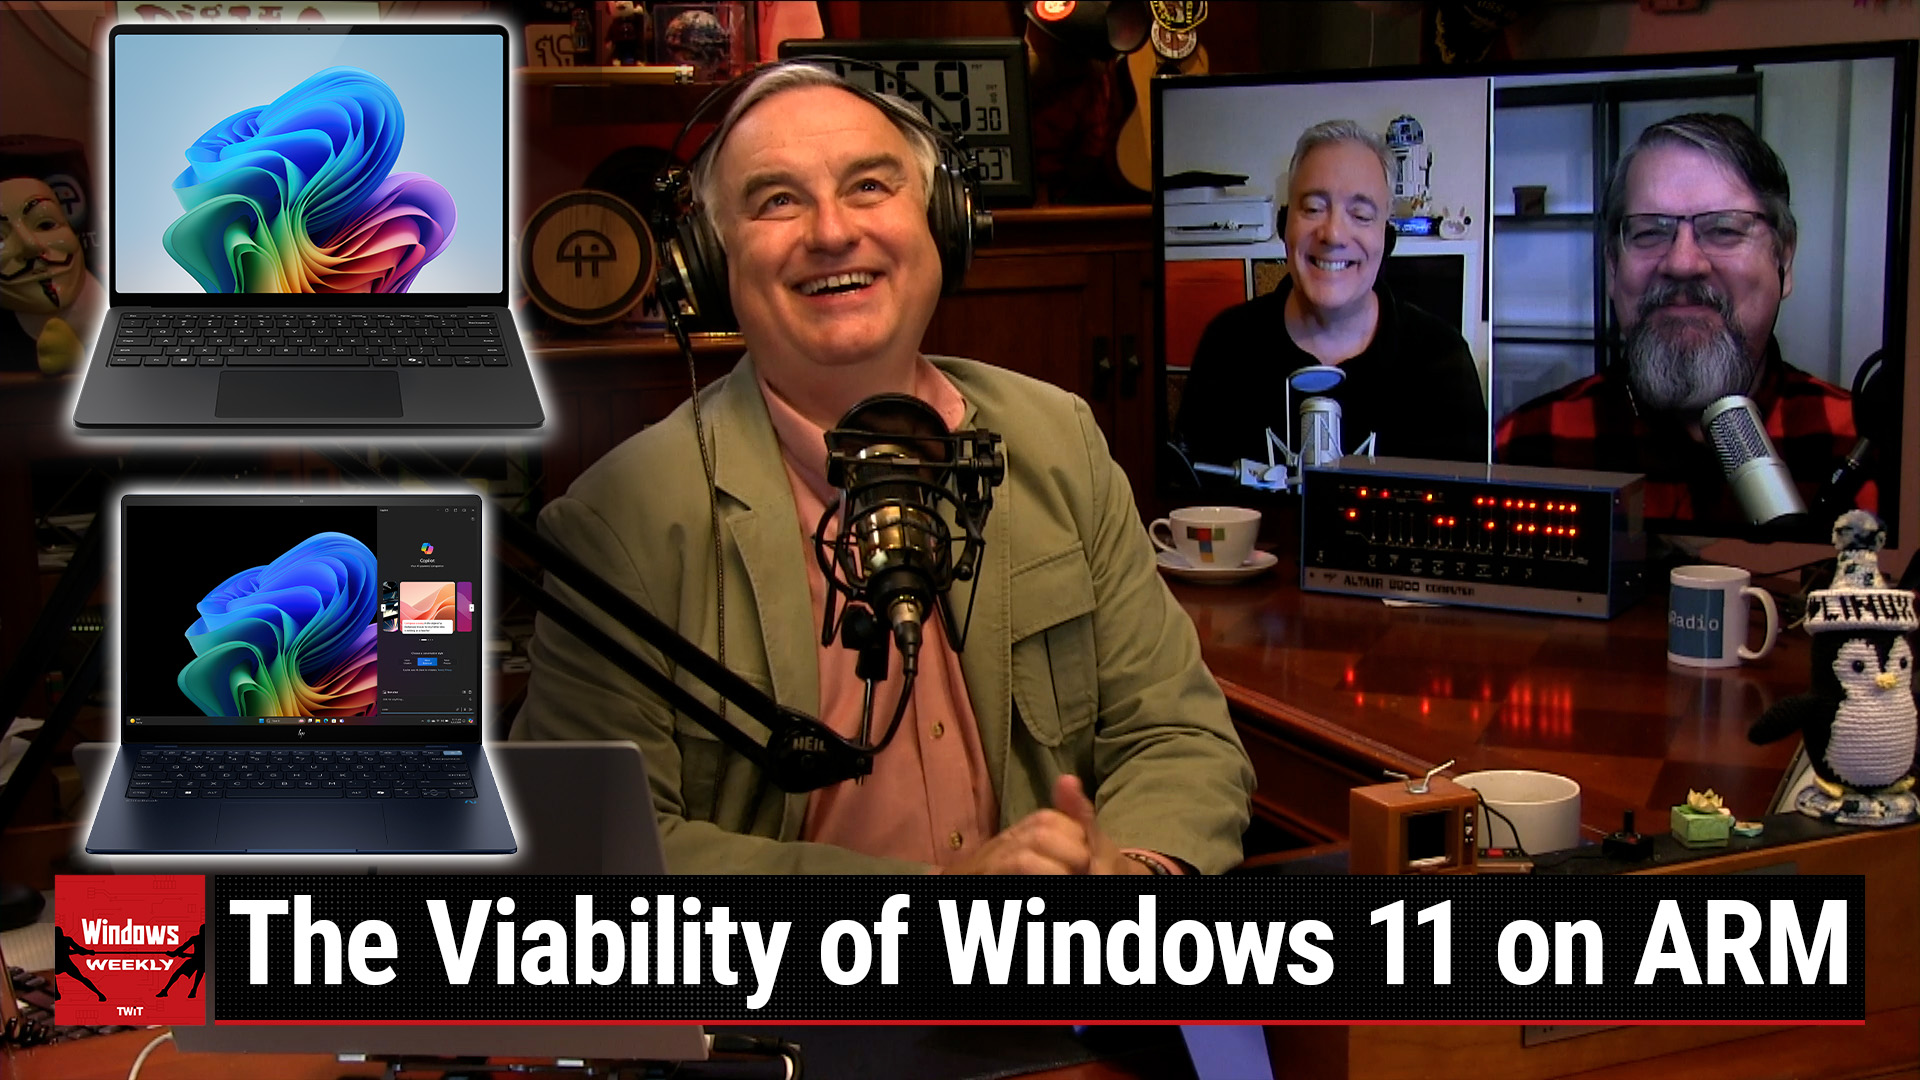 Find the Blue Penguin (Windows Weekly #888)